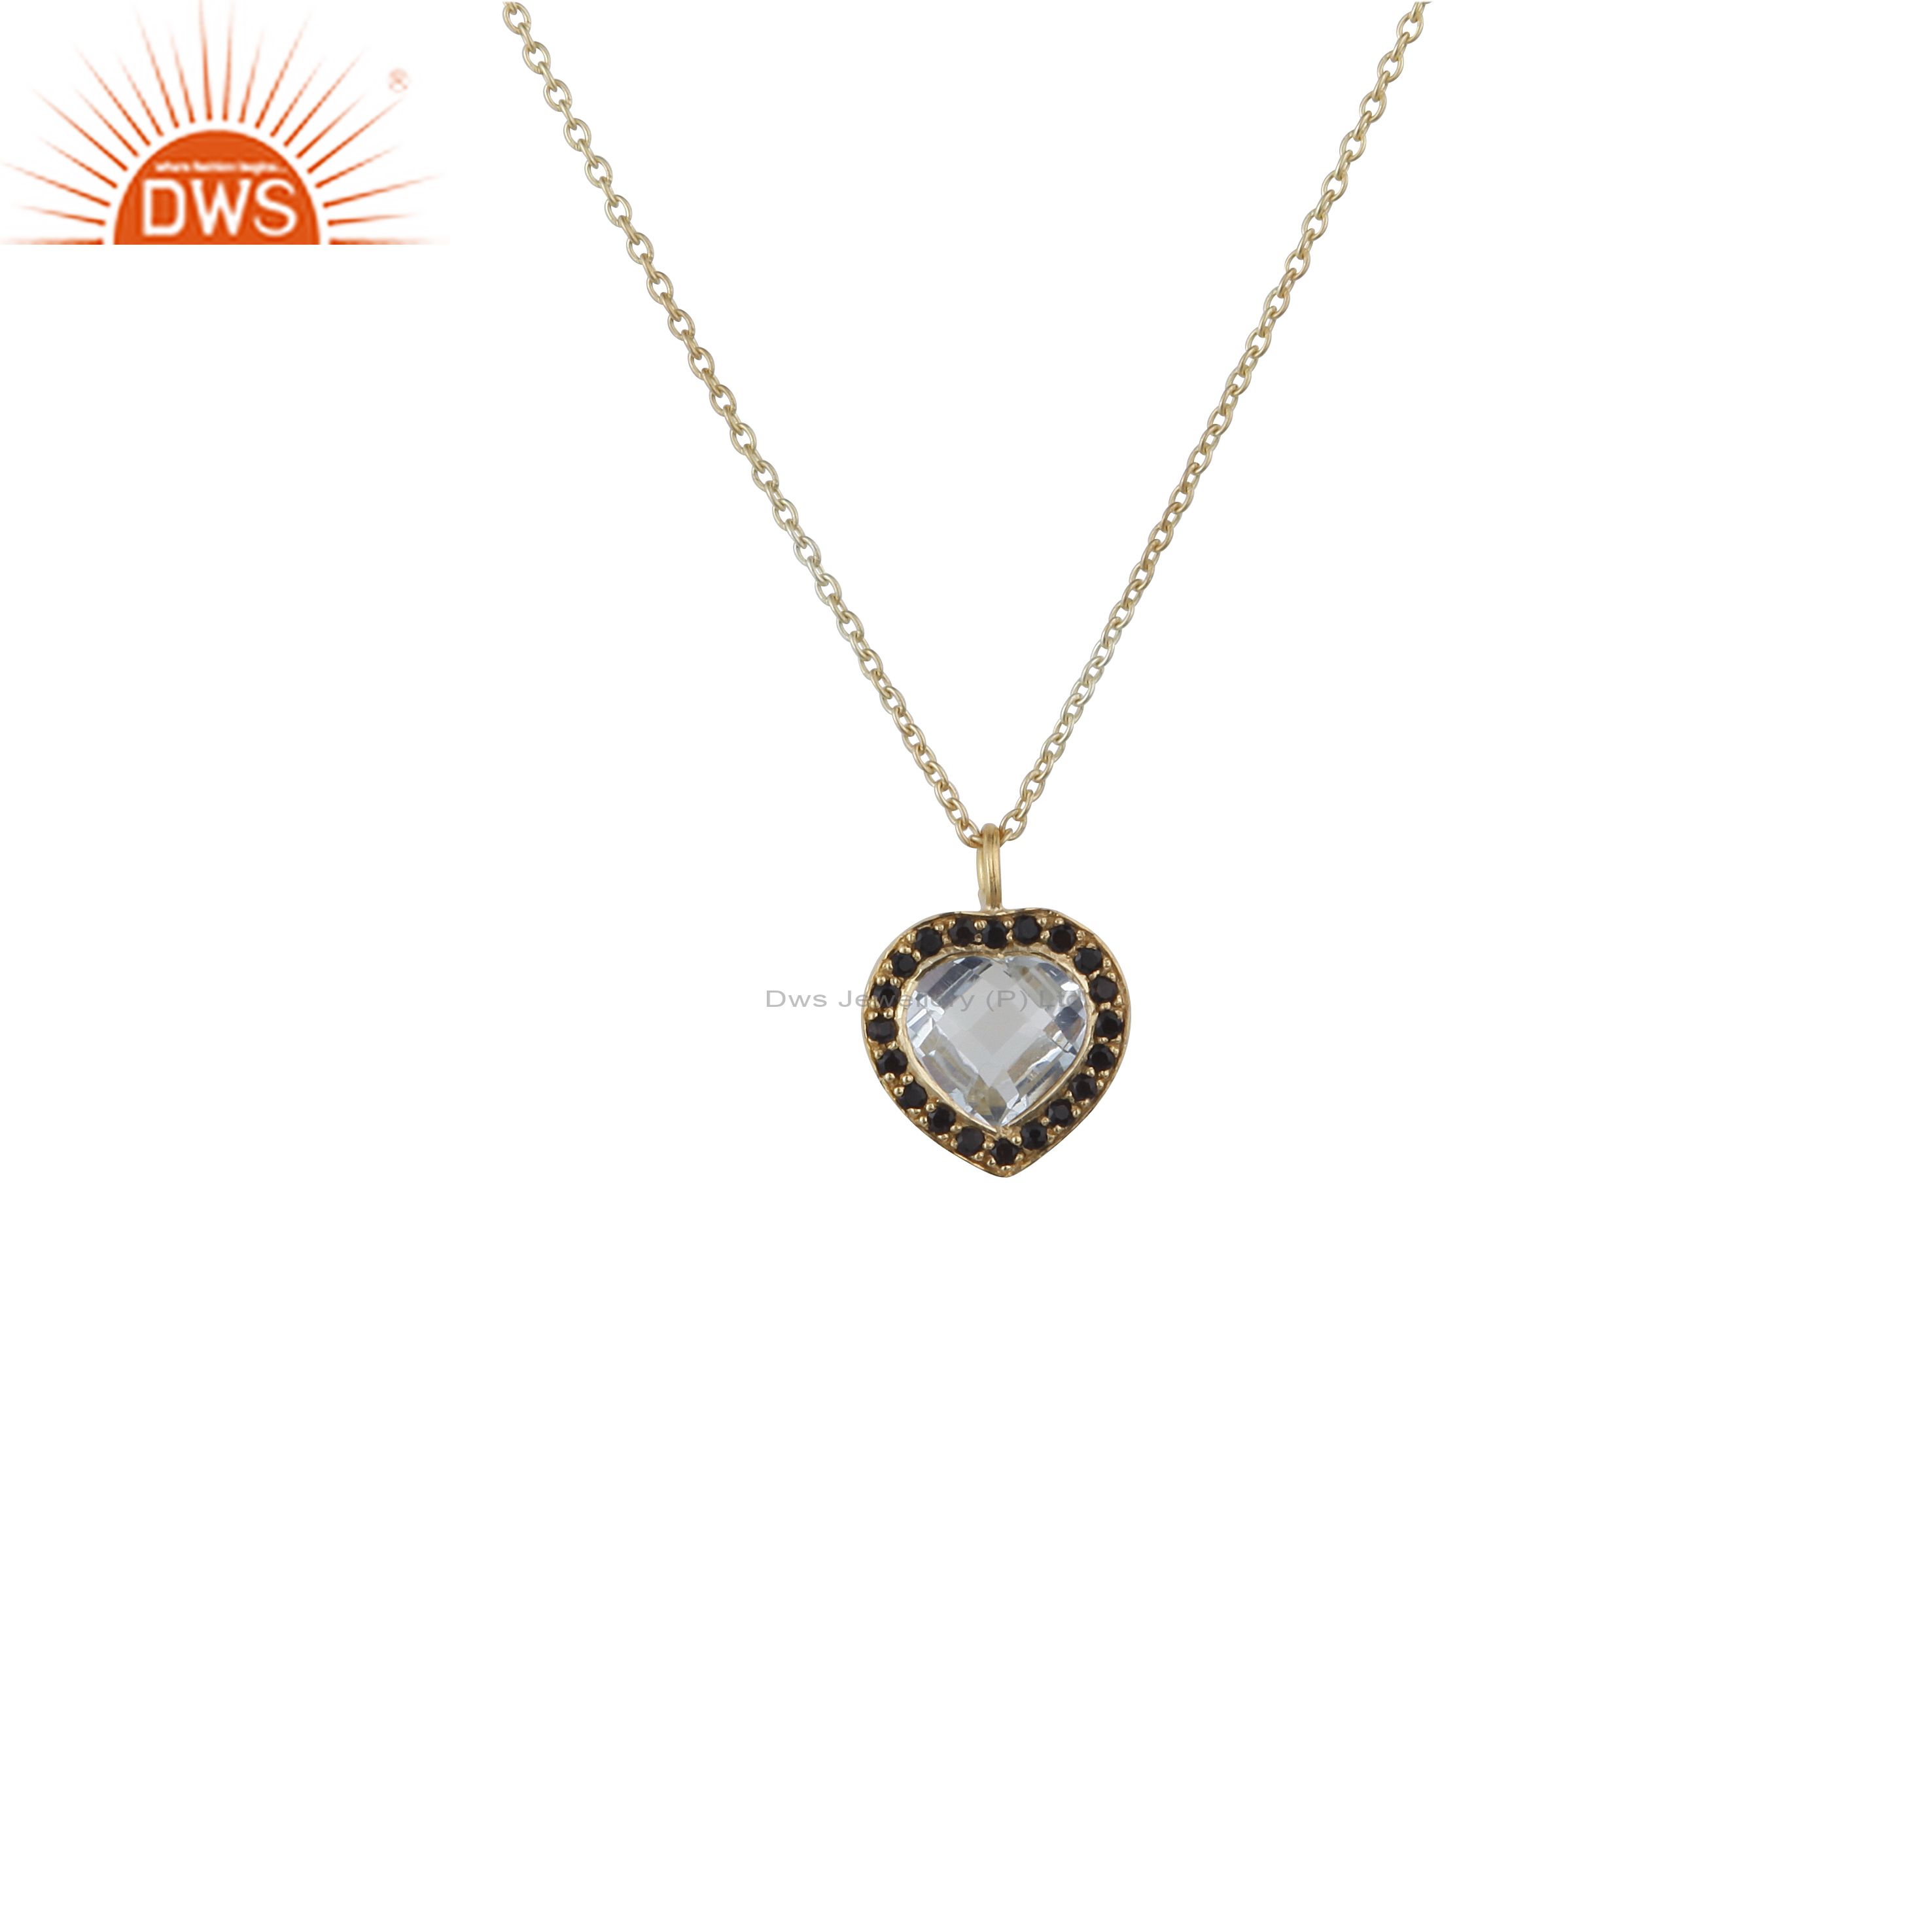 18k gold plated sterling silver crystal quartz and white topaz pendant necklace